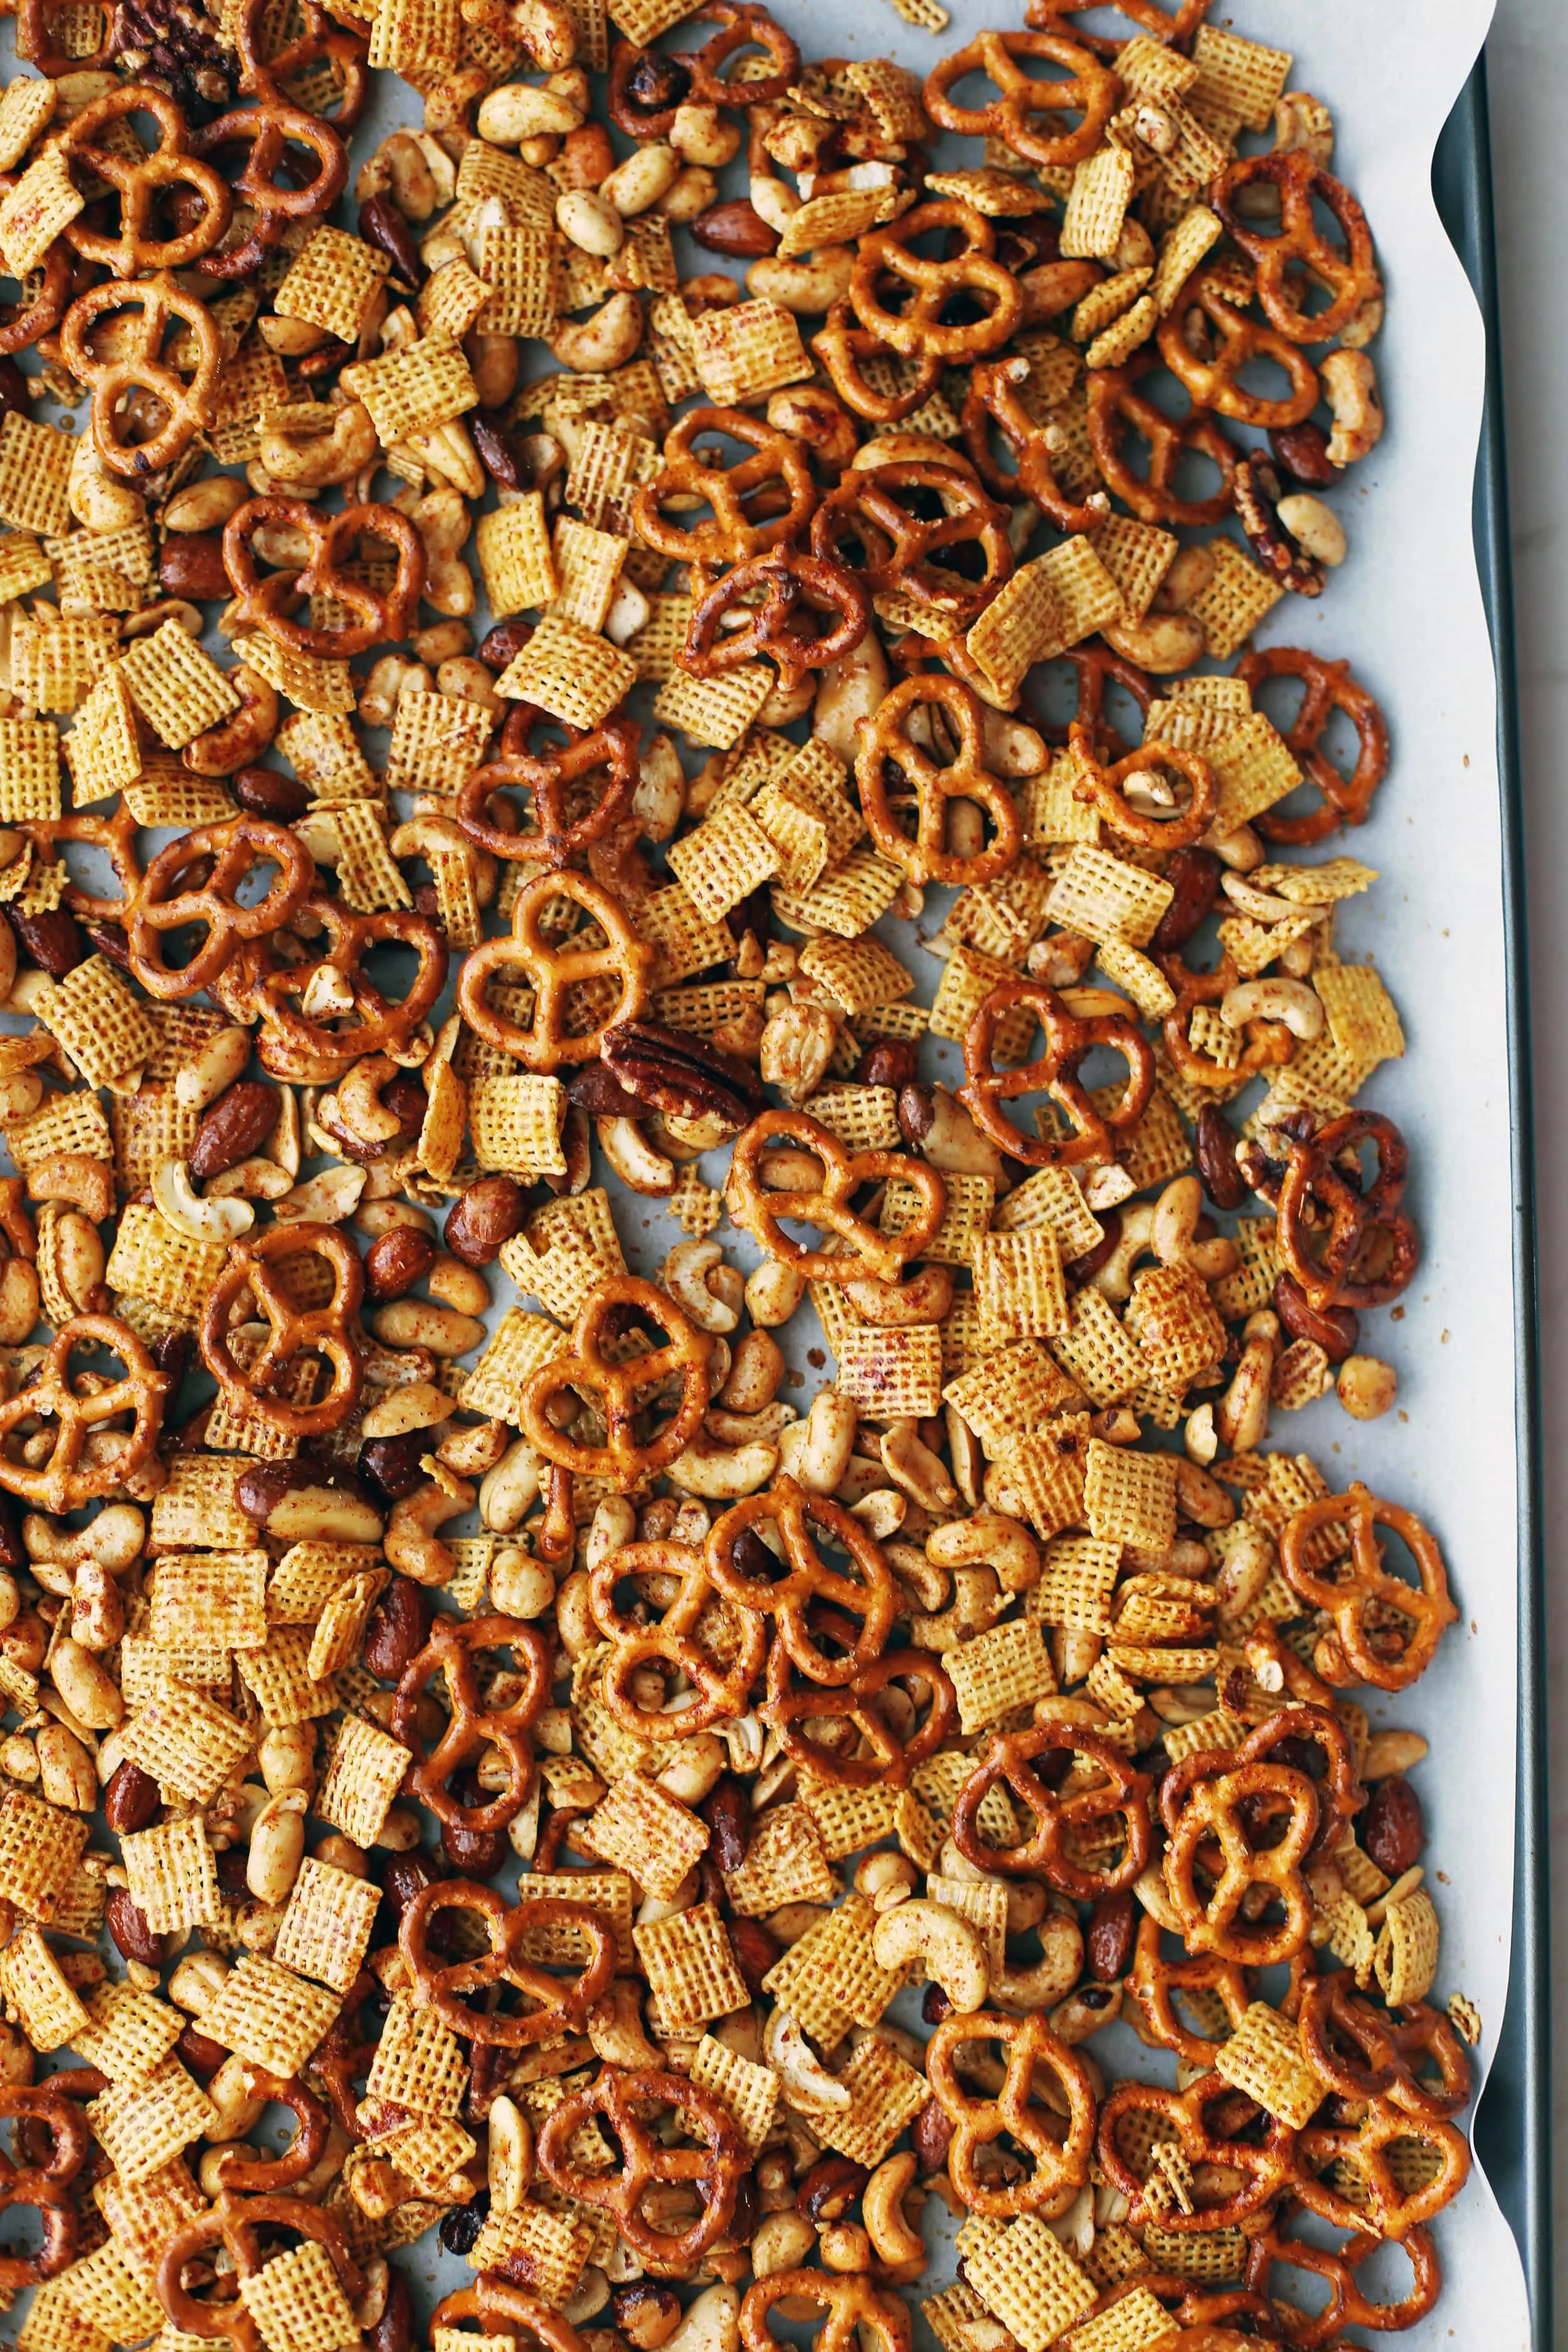 Baked Maple Chili Nuts and Chex Snack Mix on a parchment paper lined baking sheet.